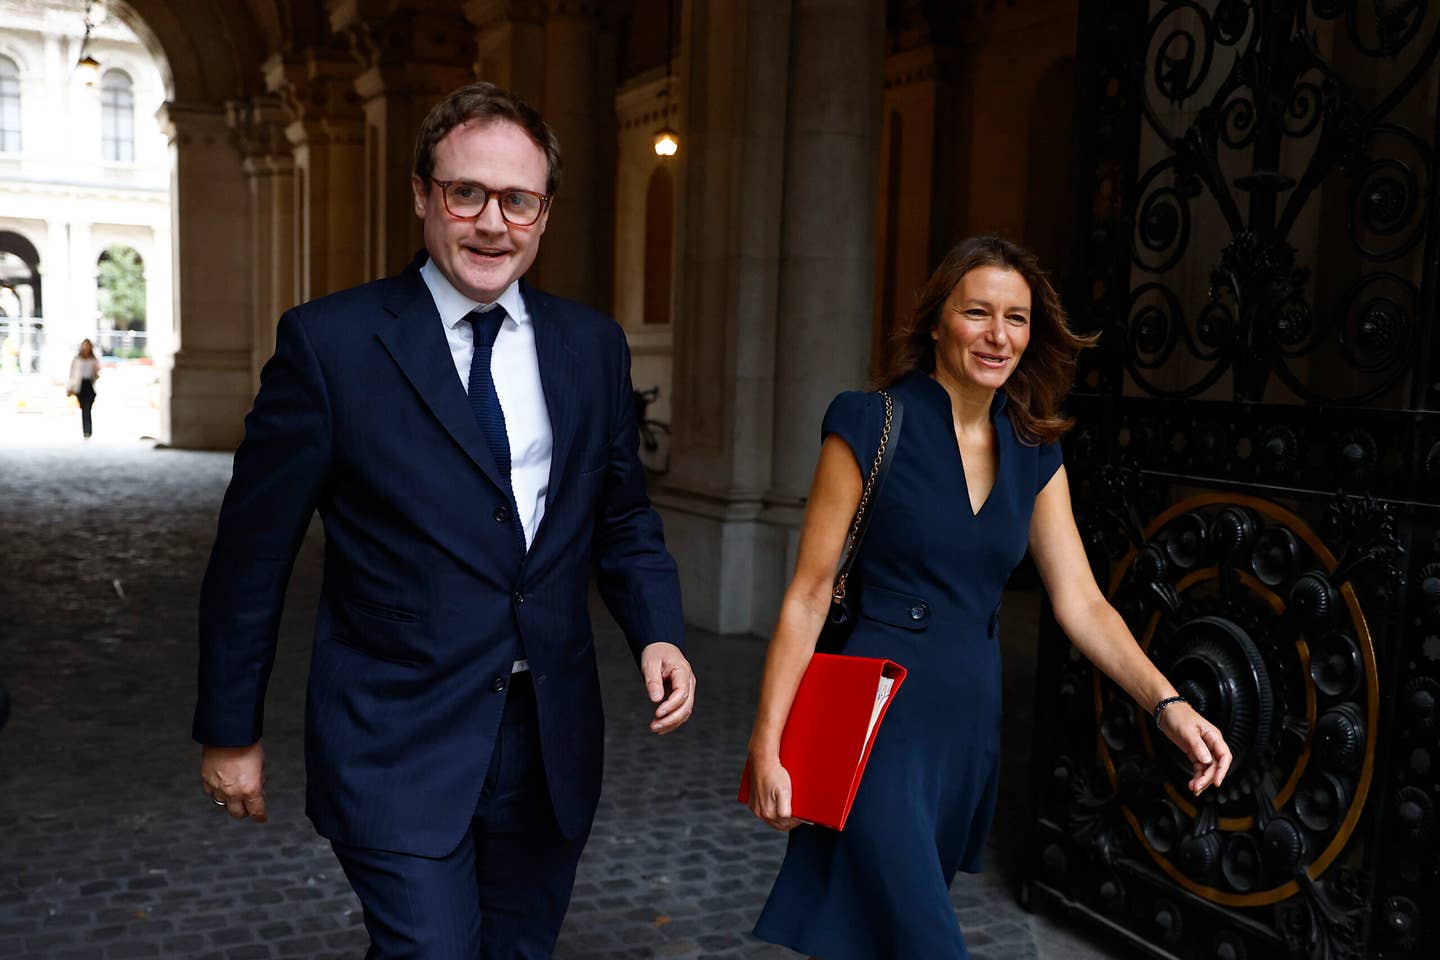 Minister of State for Security Tom Tugendhat and Secretary of State for Digital, Culture, Media and Sport Lucy Frazer arrive for a cabinet meeting at Downing Street on September 12, 2023 in London, England. <em>Photo by Peter Nicholls/Getty Images</em>